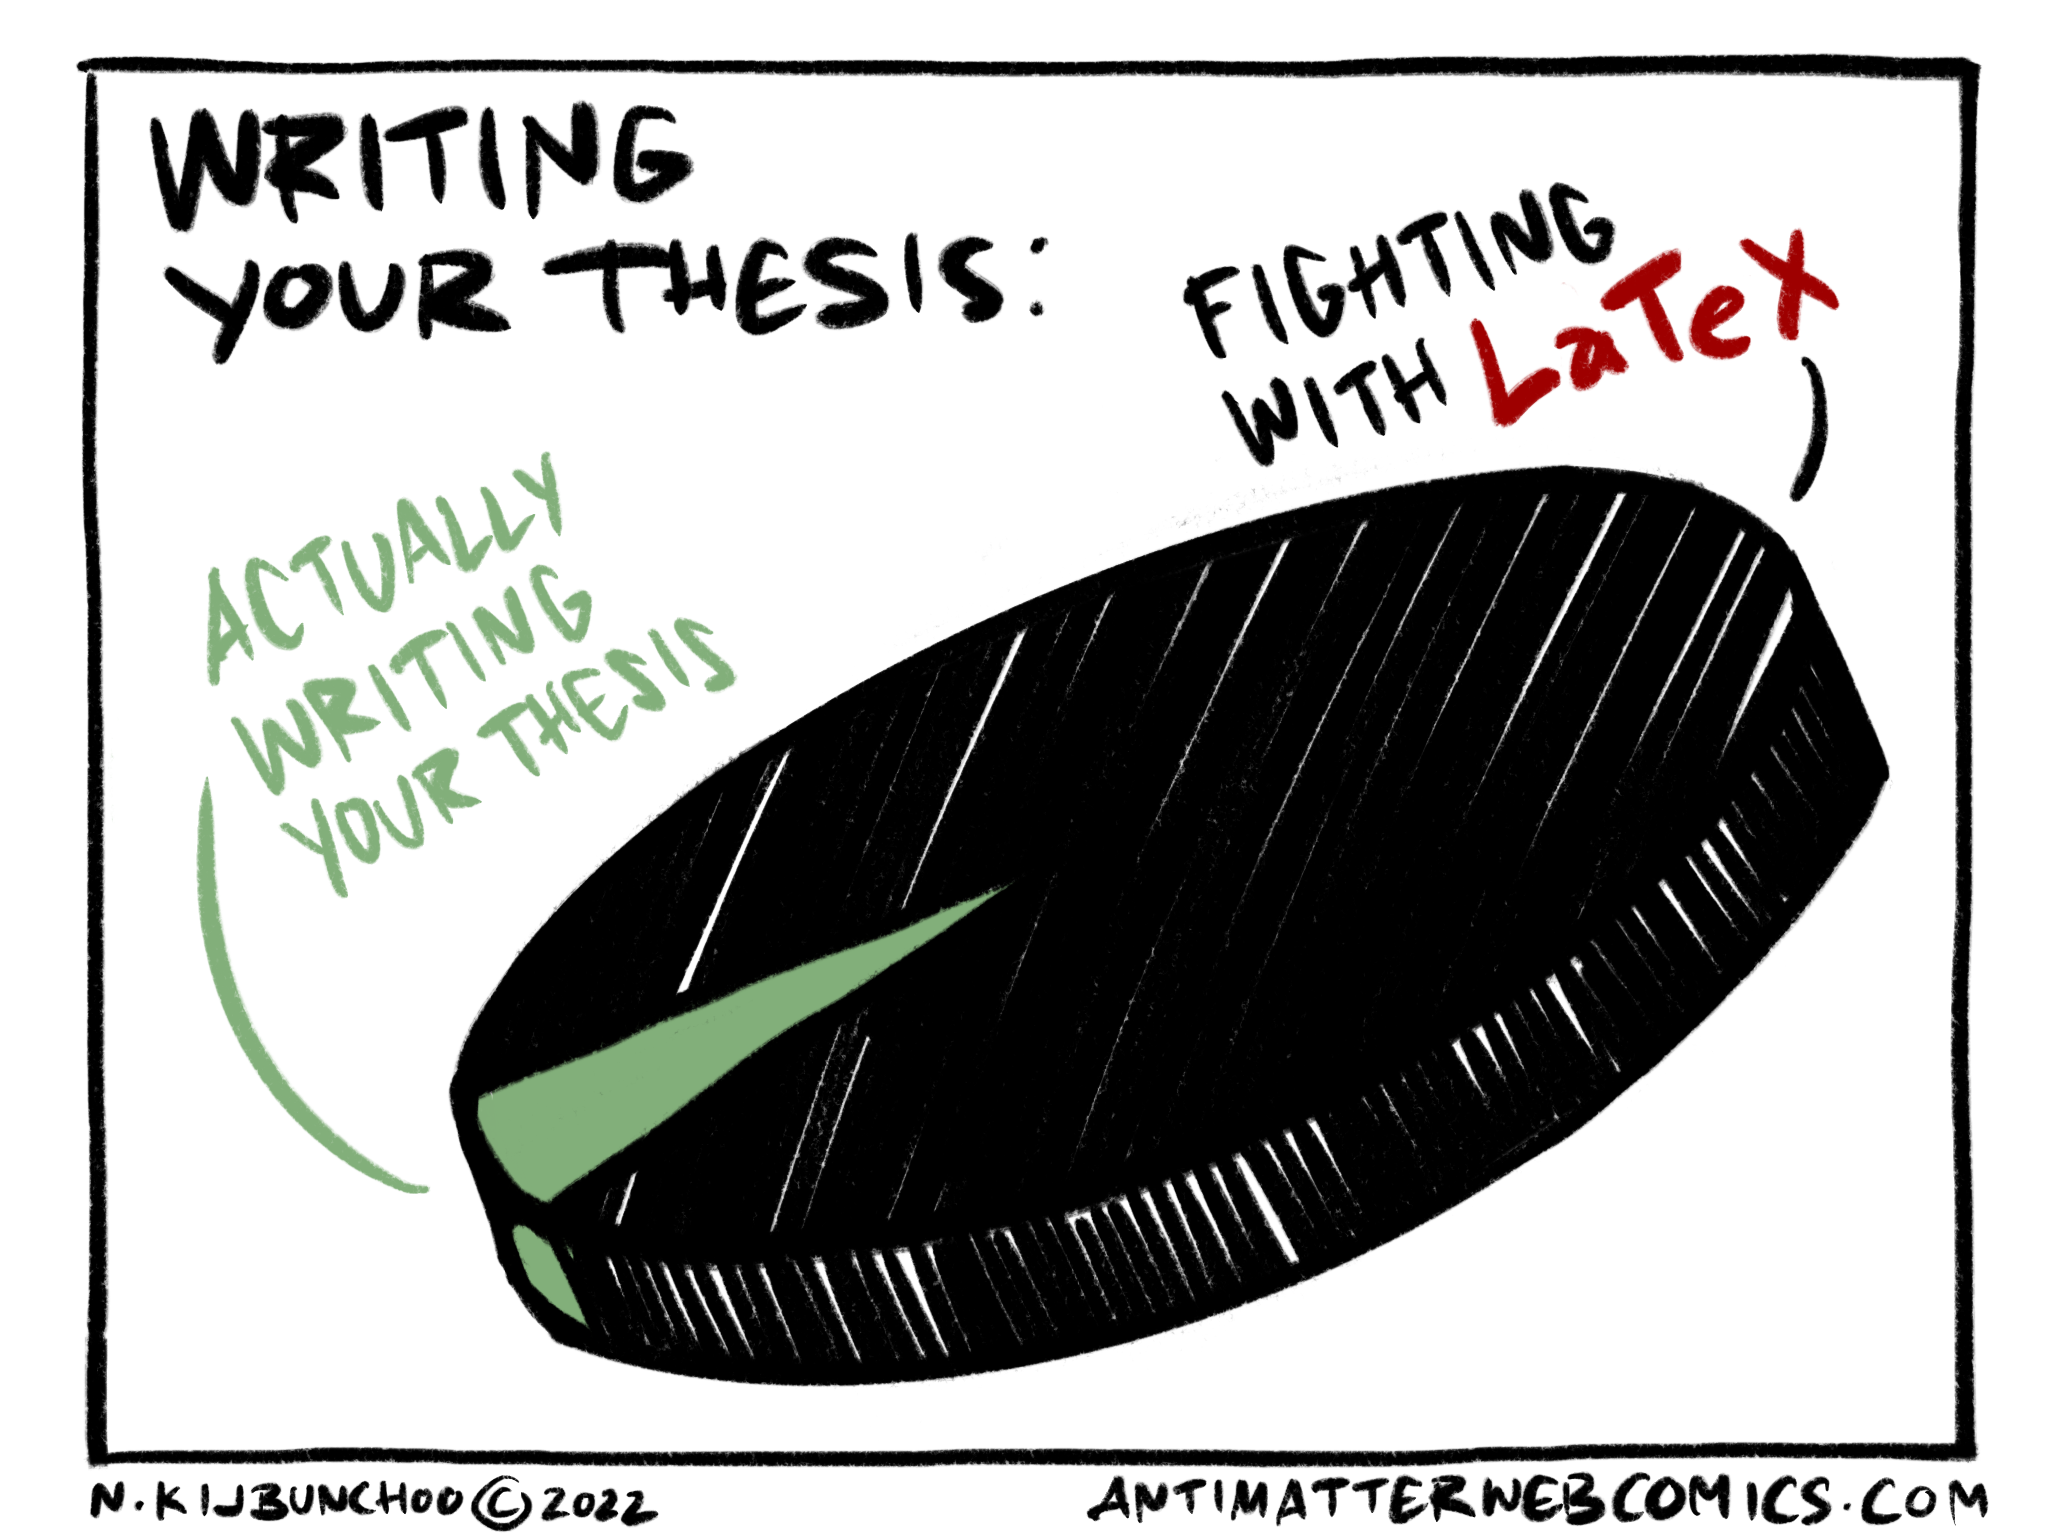 PhD comics had one similar to this I just felt this was more accurate.